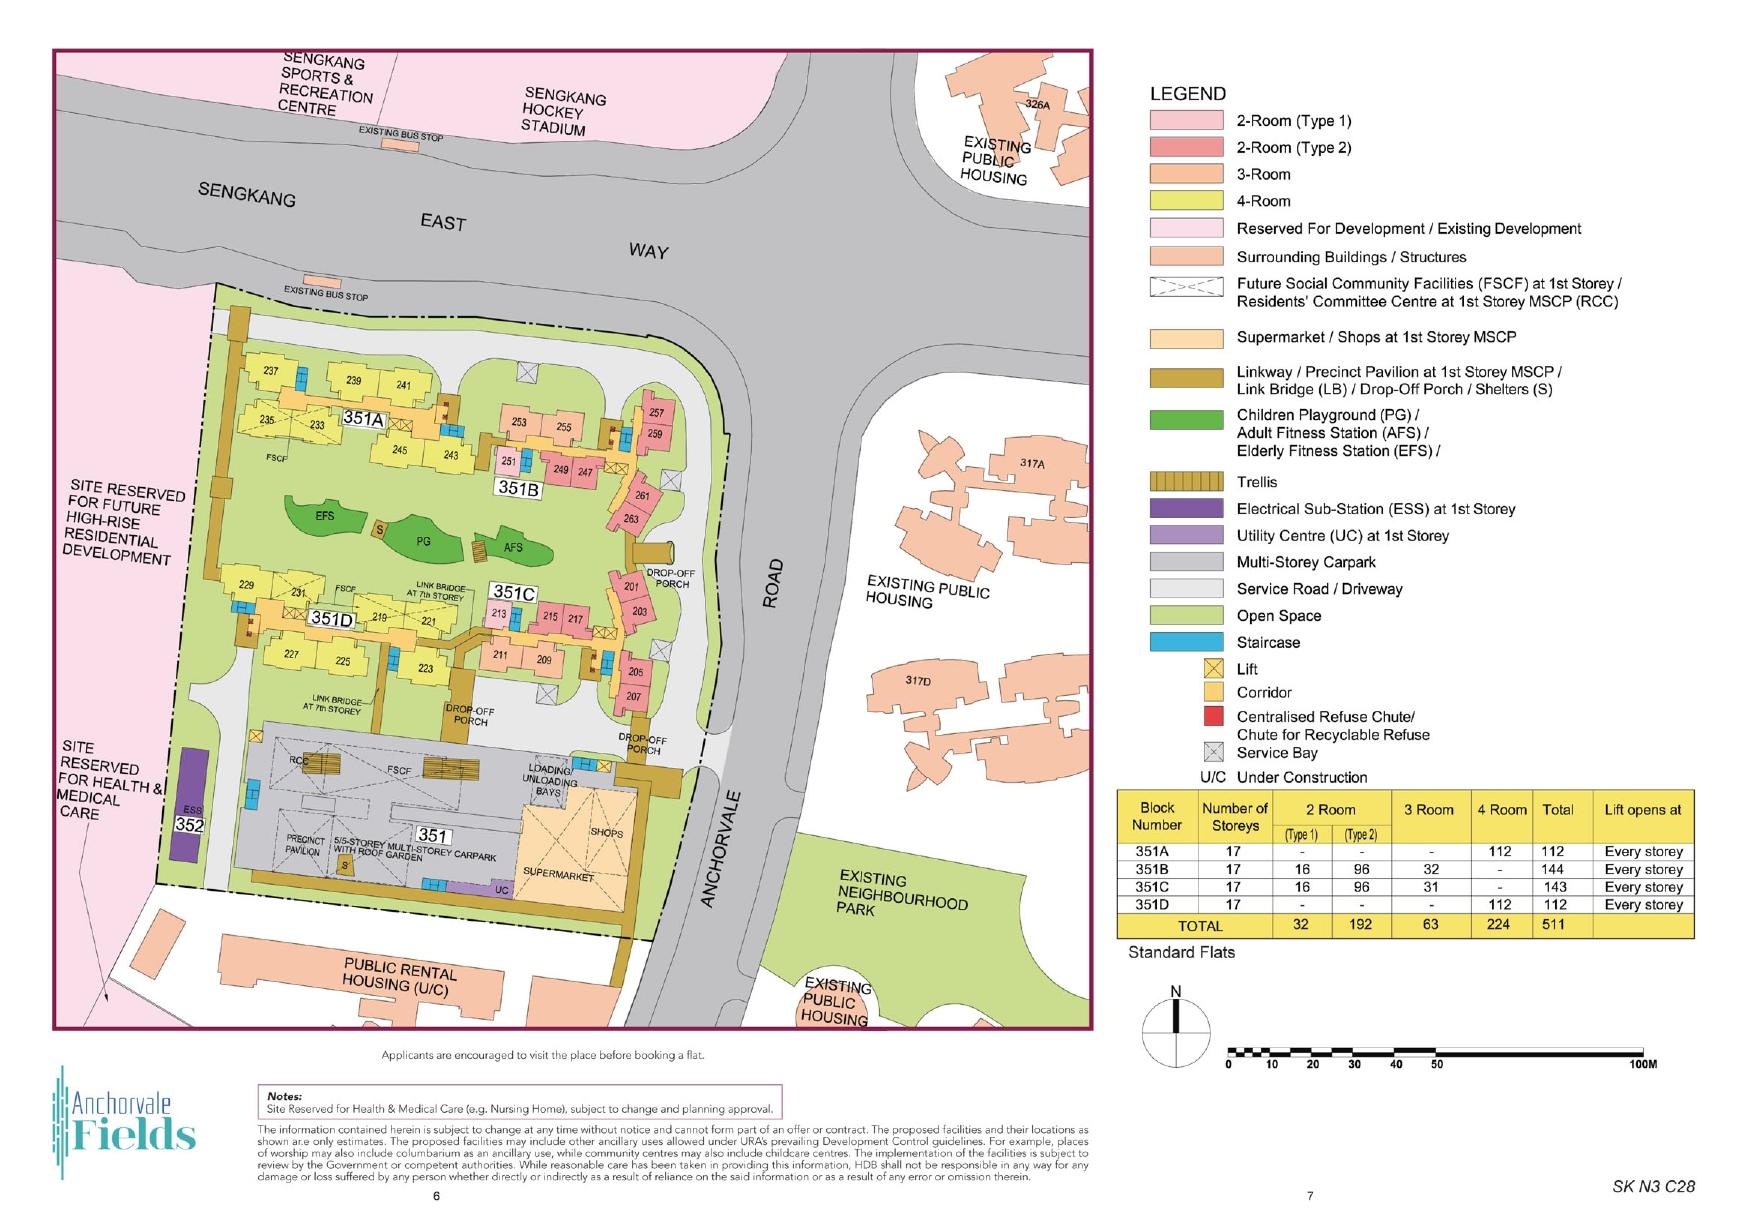 Anchorvale Fields site-plan